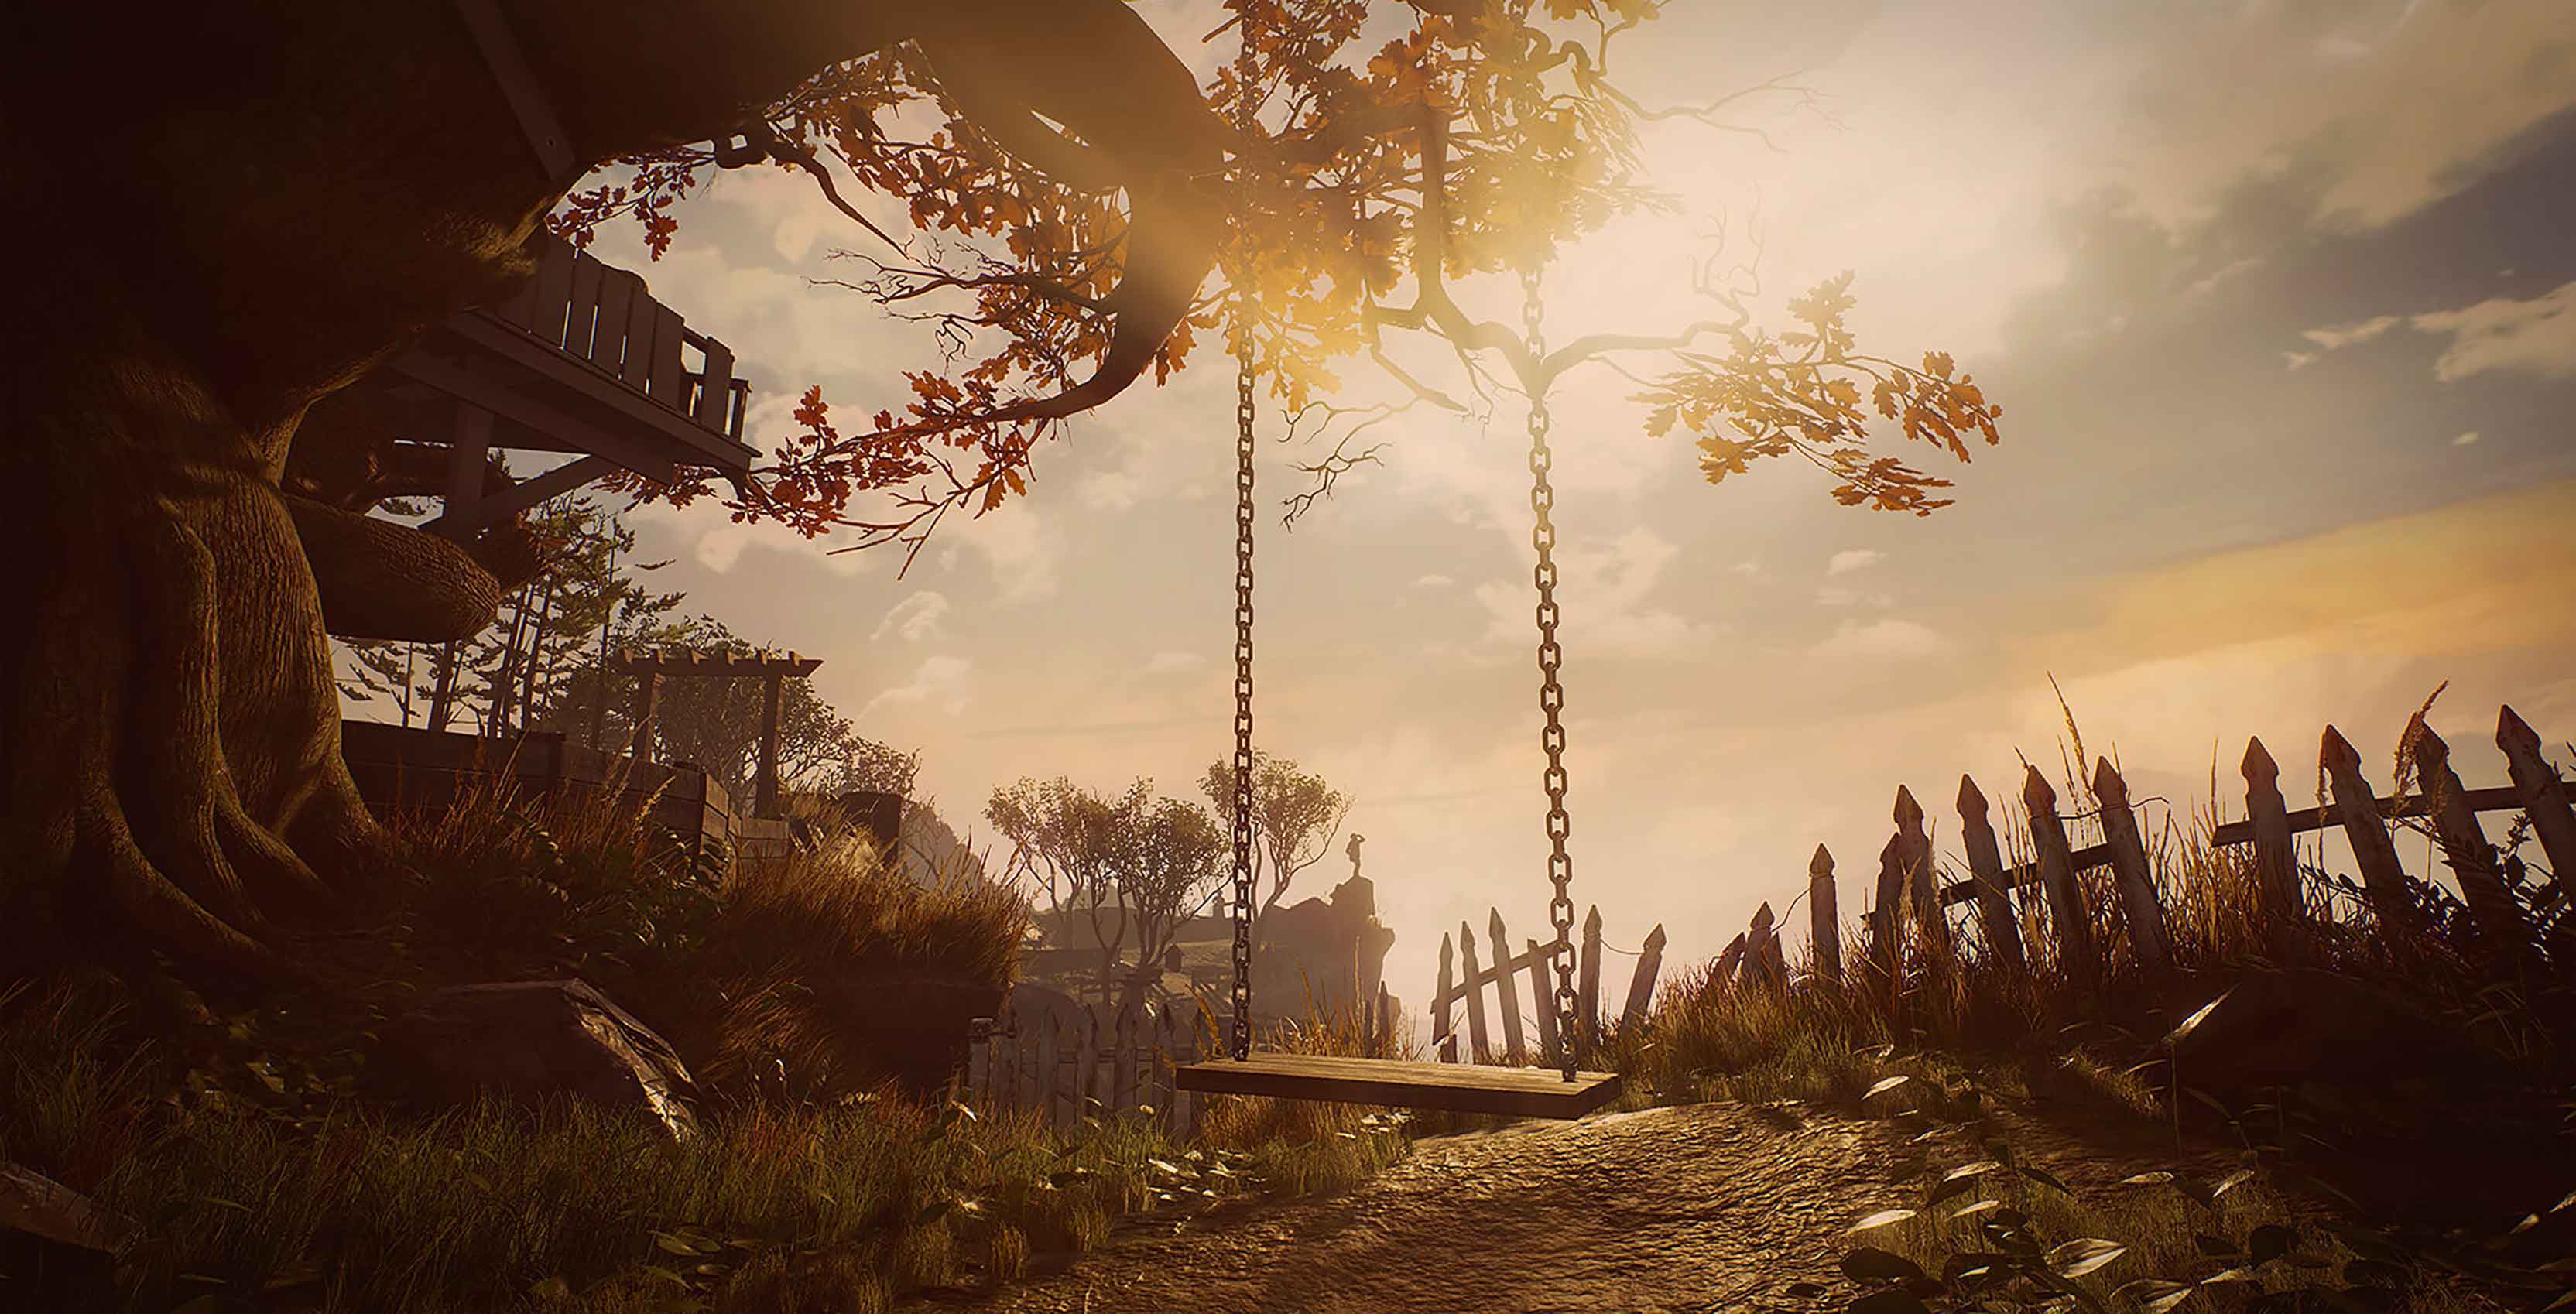 What Remains of Edith Finch swing set